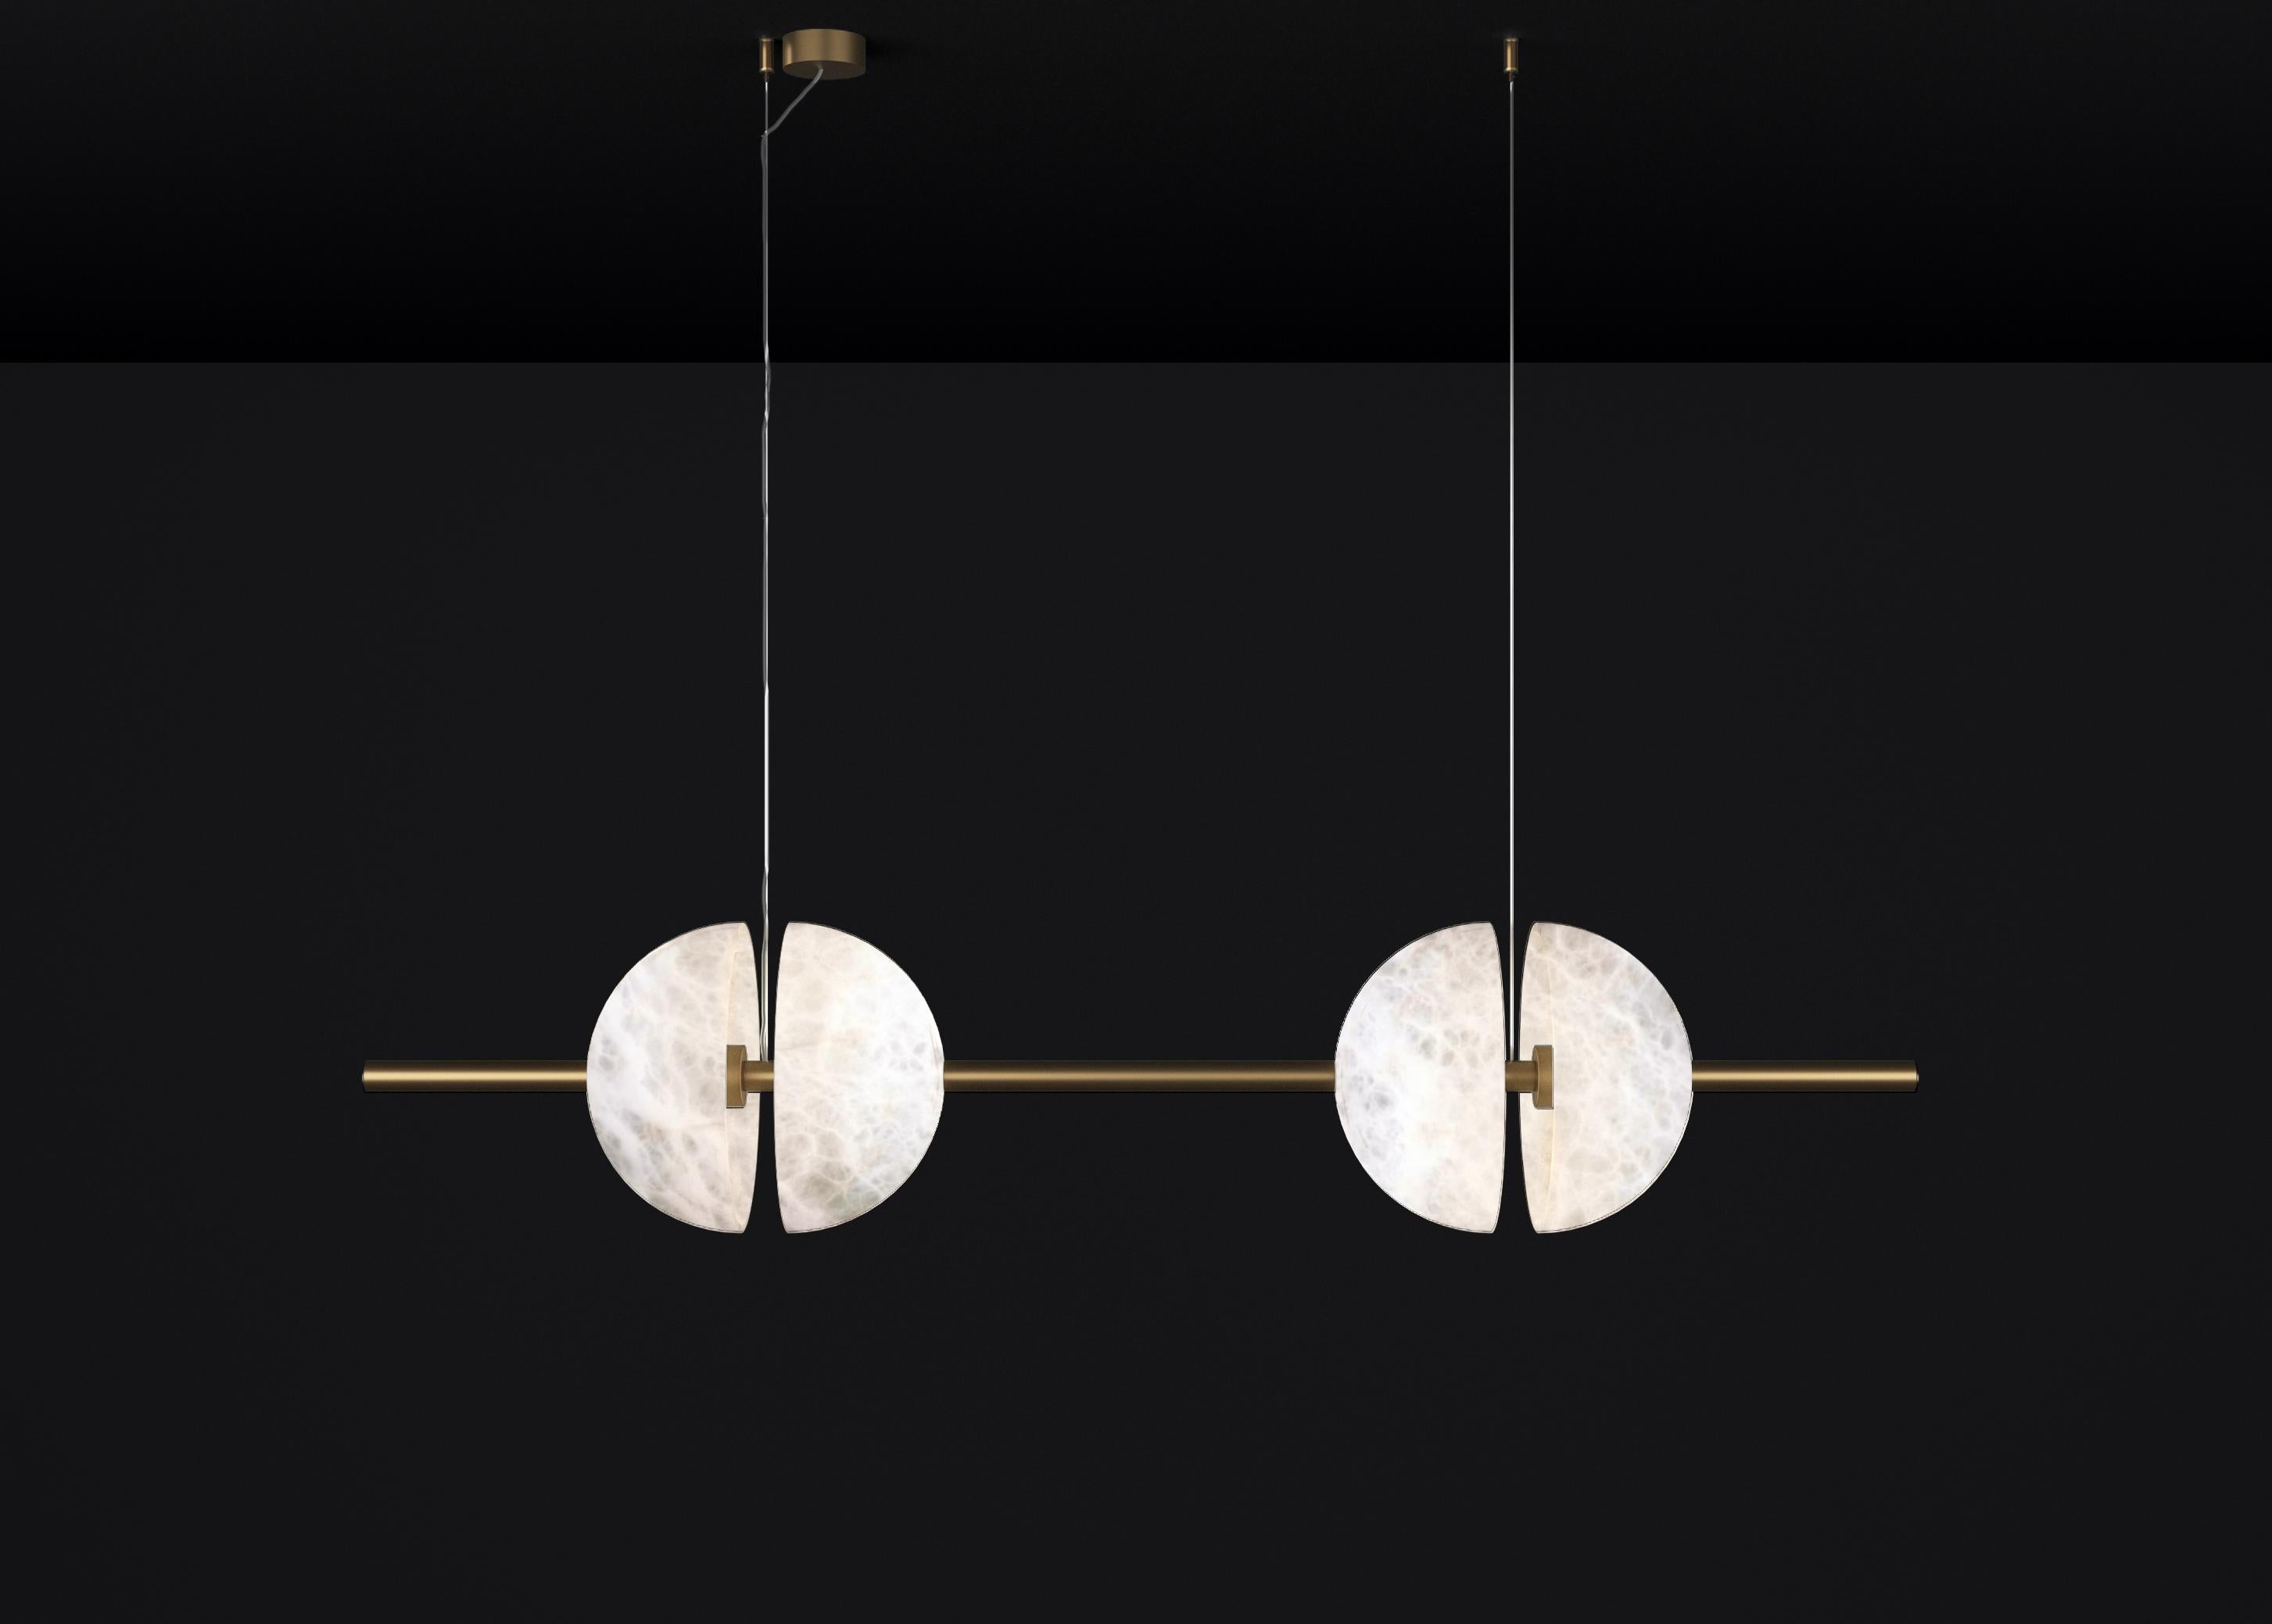 Ermes Bronze And Alabaster Pendant Light 1 by Alabastro Italiano
Dimensions: D 30 x W 150 x H 300 cm.
Materials: White alabaster and bronze.

Available in different finishes: Shiny Silver, Bronze, Brushed Brass, Ruggine of Florence, Brushed